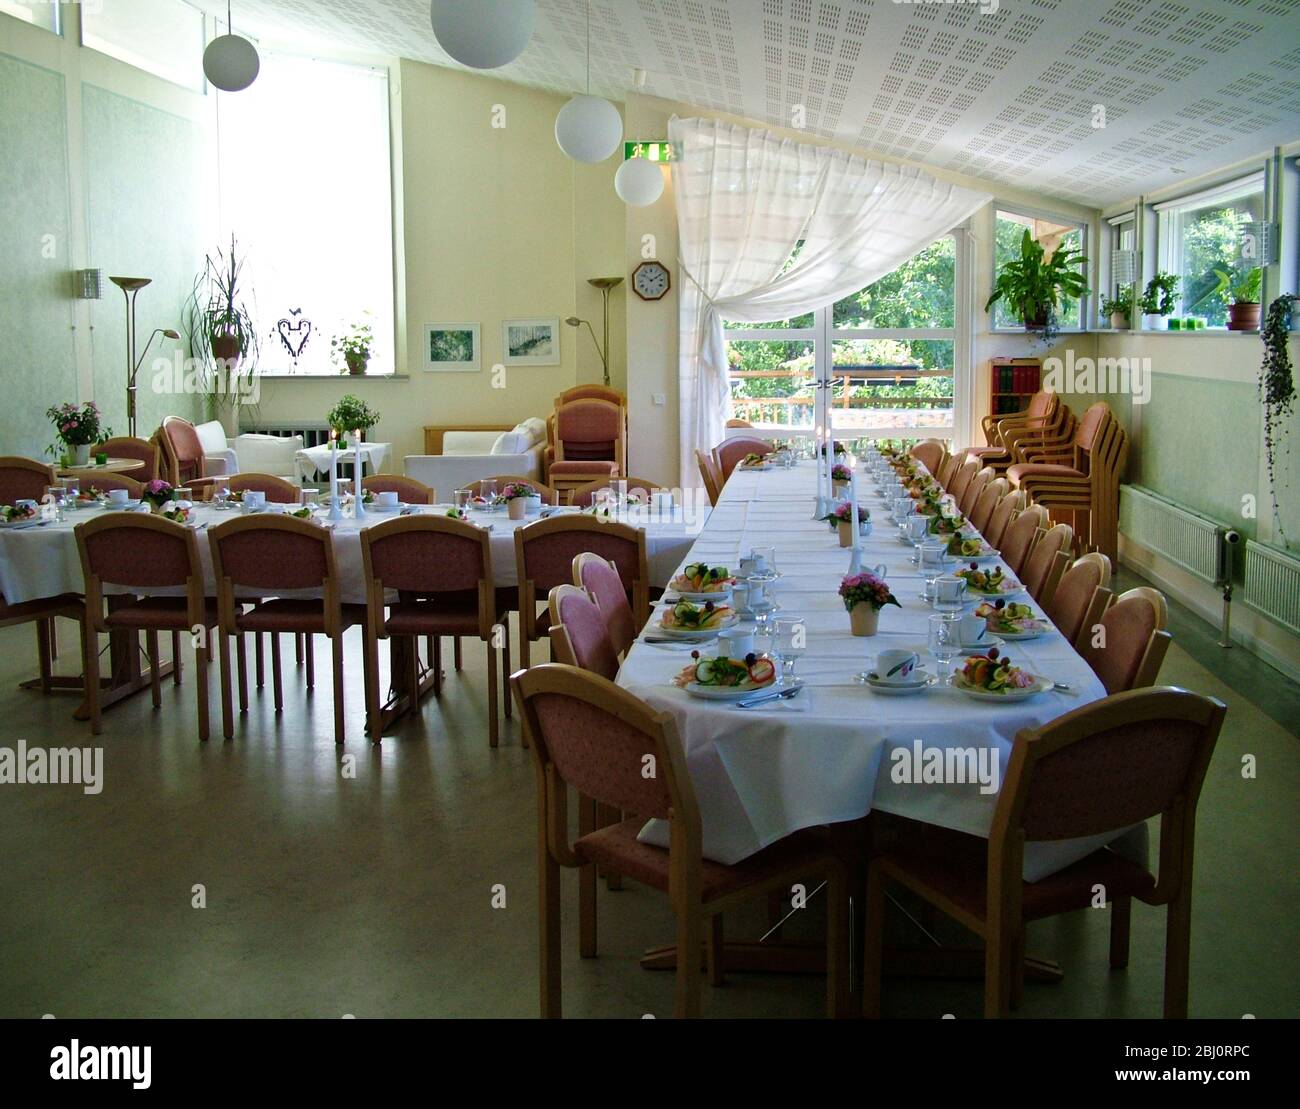 Attractive church hall in Lerum, Sweden, set out for reception lunch after a funeral, with Swedish open sandwiches, candles, and flowers - Stock Photo